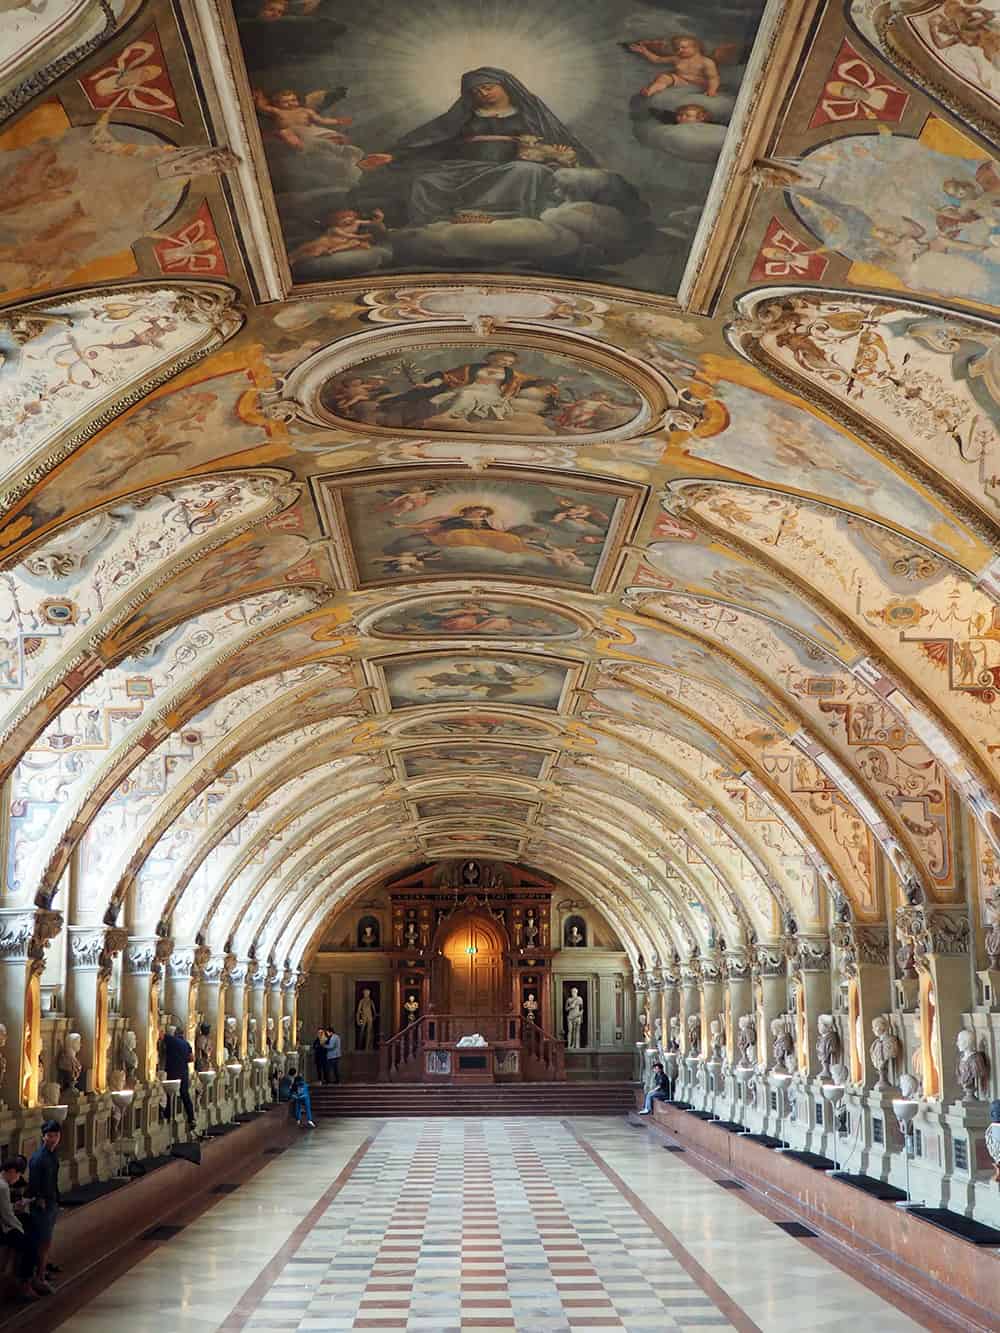 The Munich Residenz in Germany is has 10 court yards and 130 rooms open to the public. Opening in the 1300s, it is still available for tour even showing damage from World War 2. | via Autumn All Along